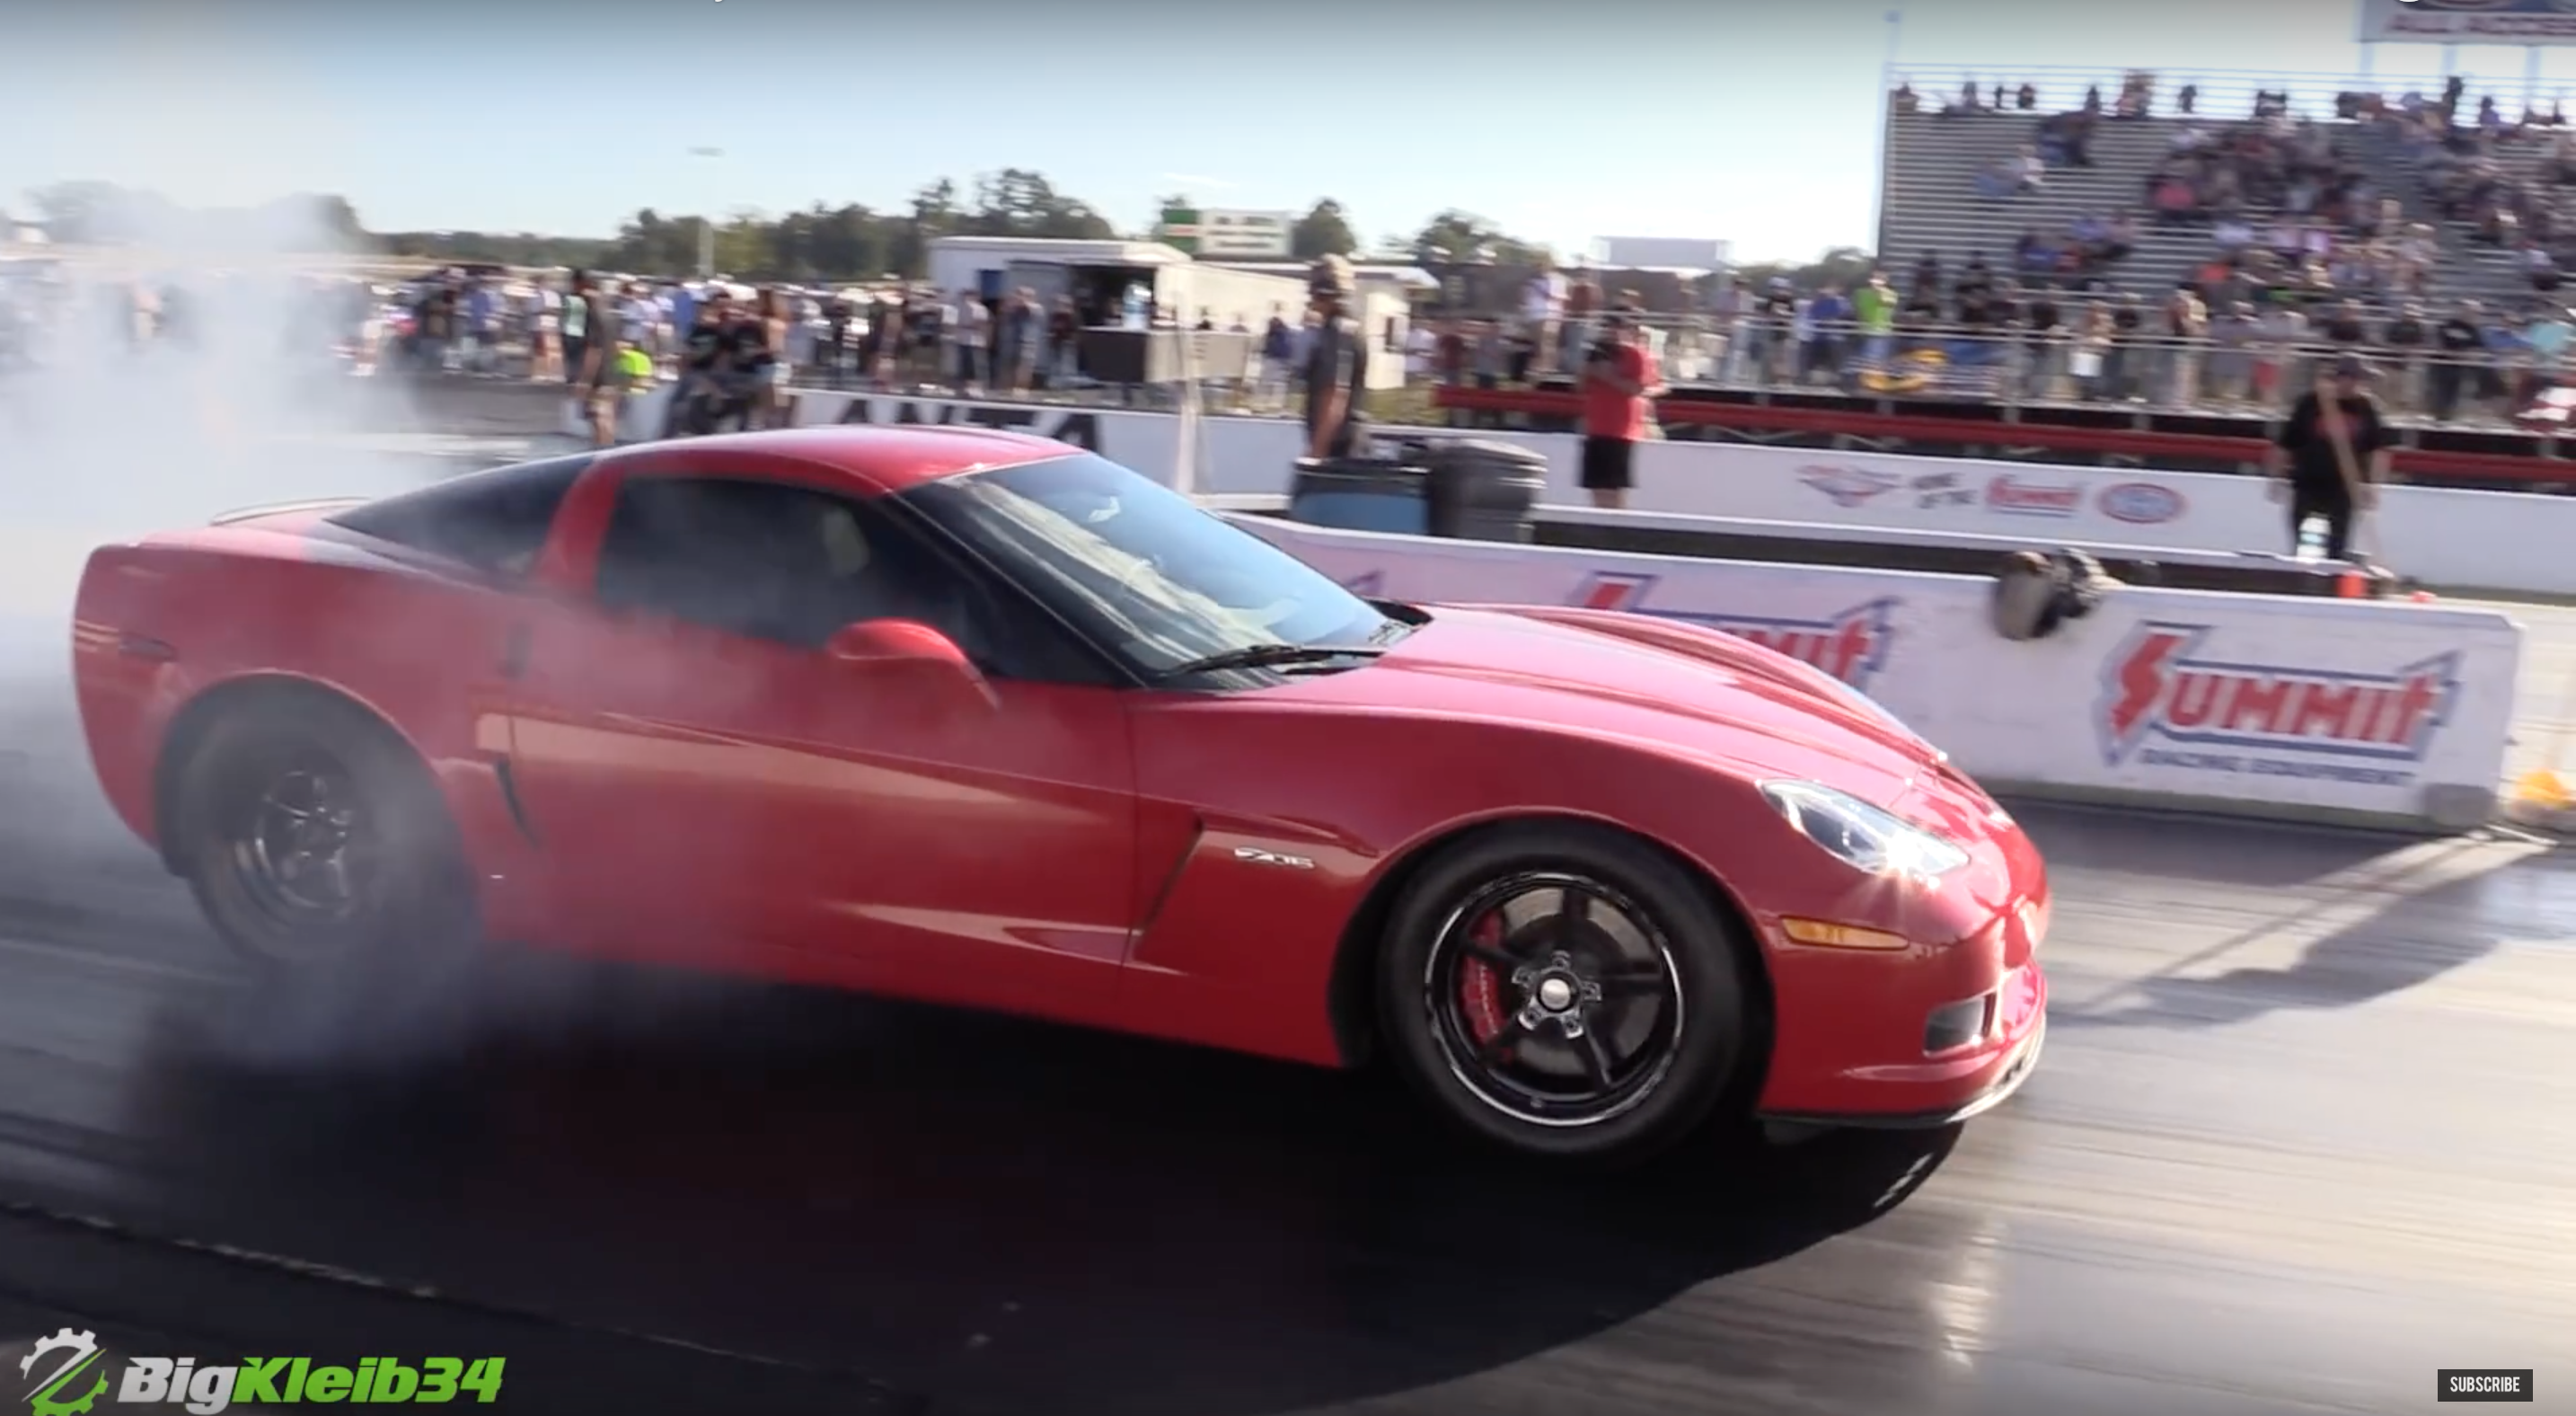 HCI-Swapped C6 Puts Down the Power